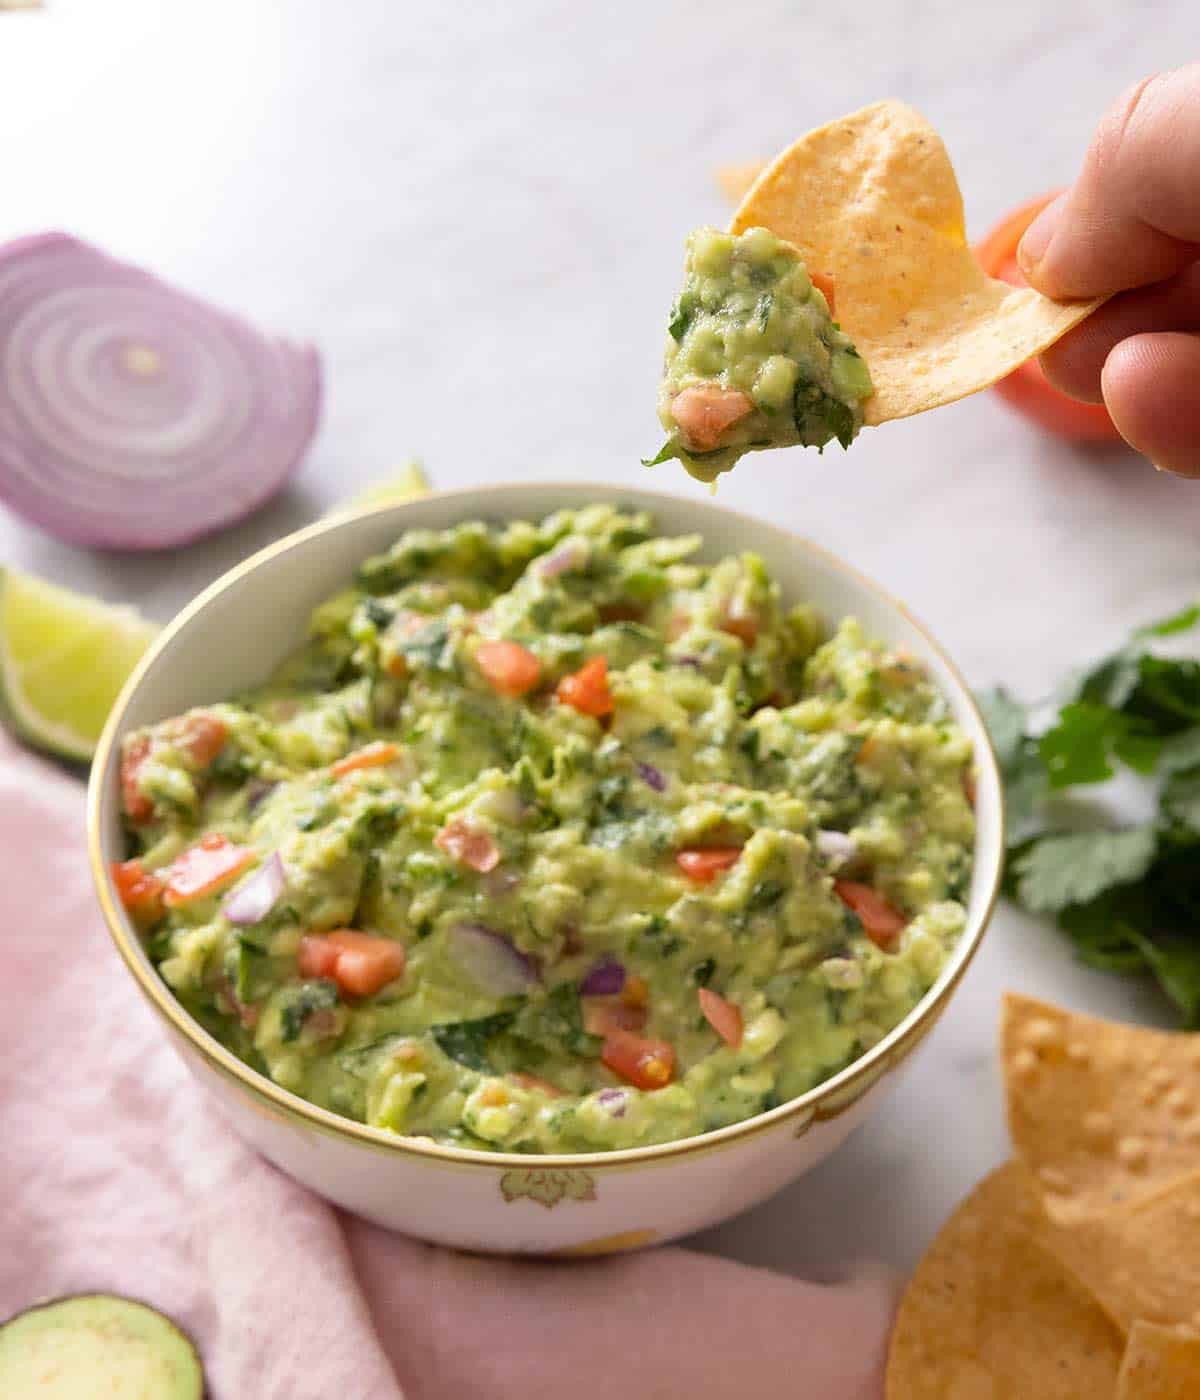 A tortilla chip picking up some guacamole from a bowl